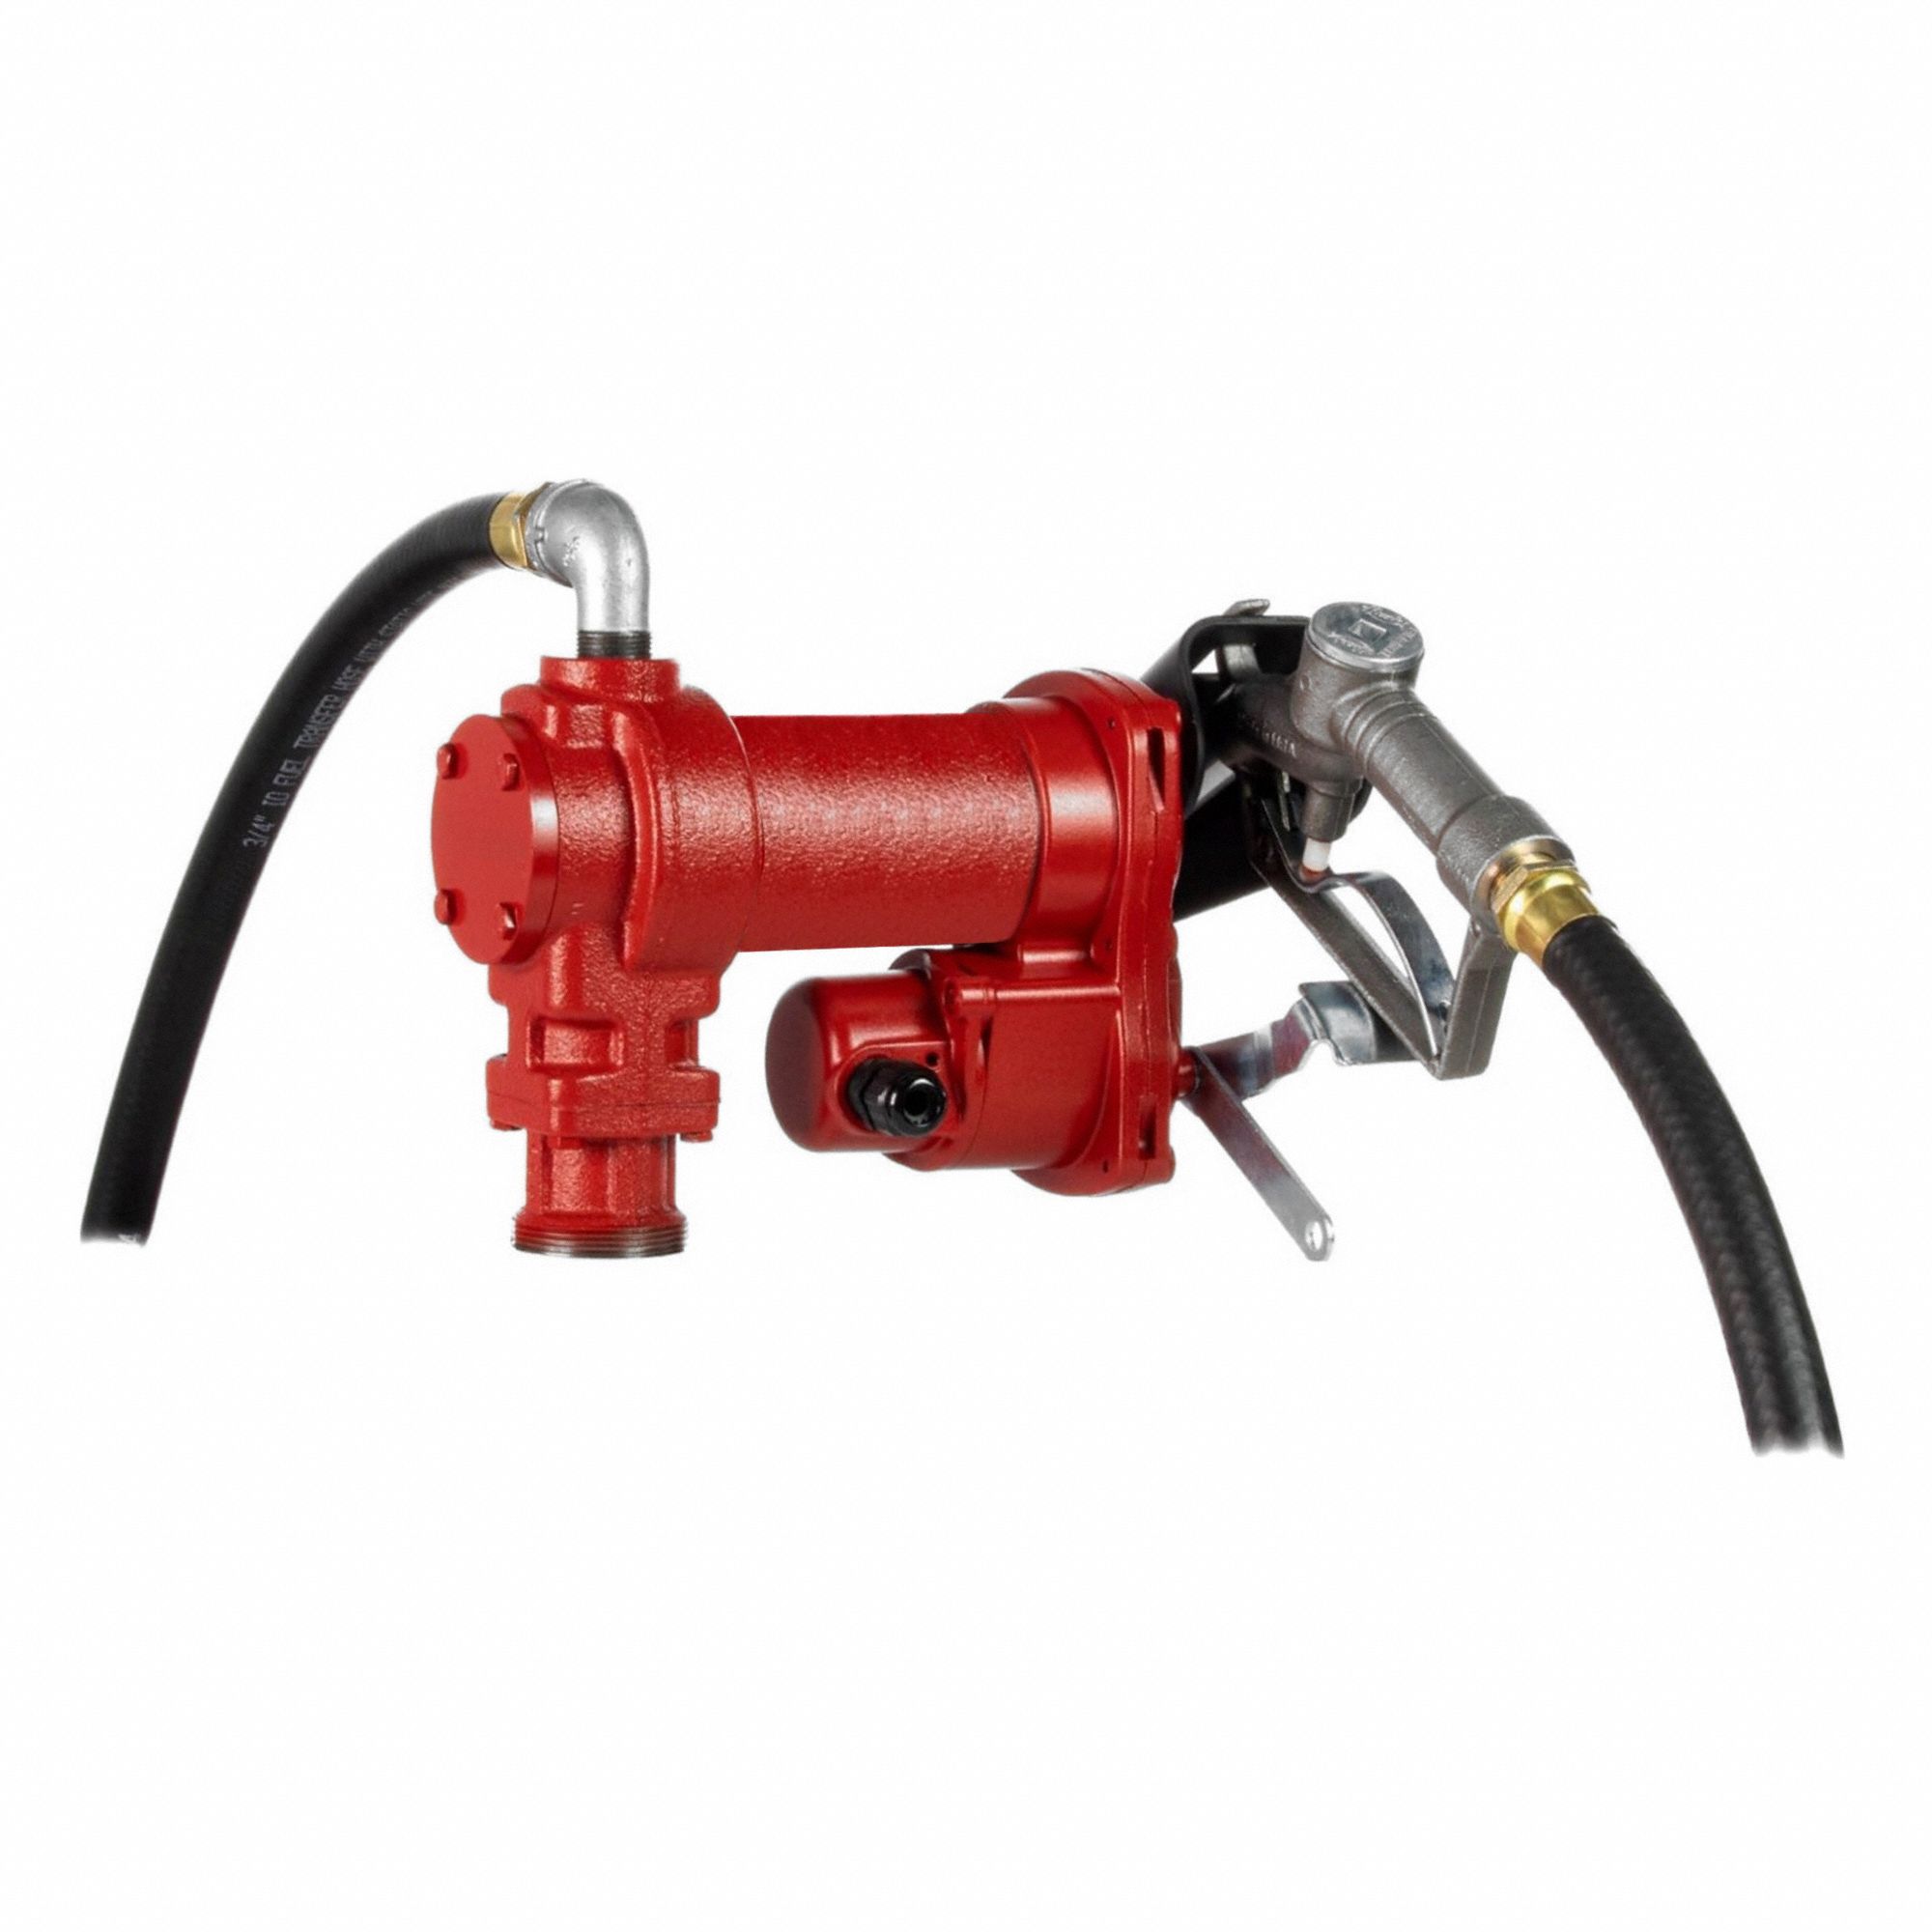 Fuel and Oil Transfer Pumps